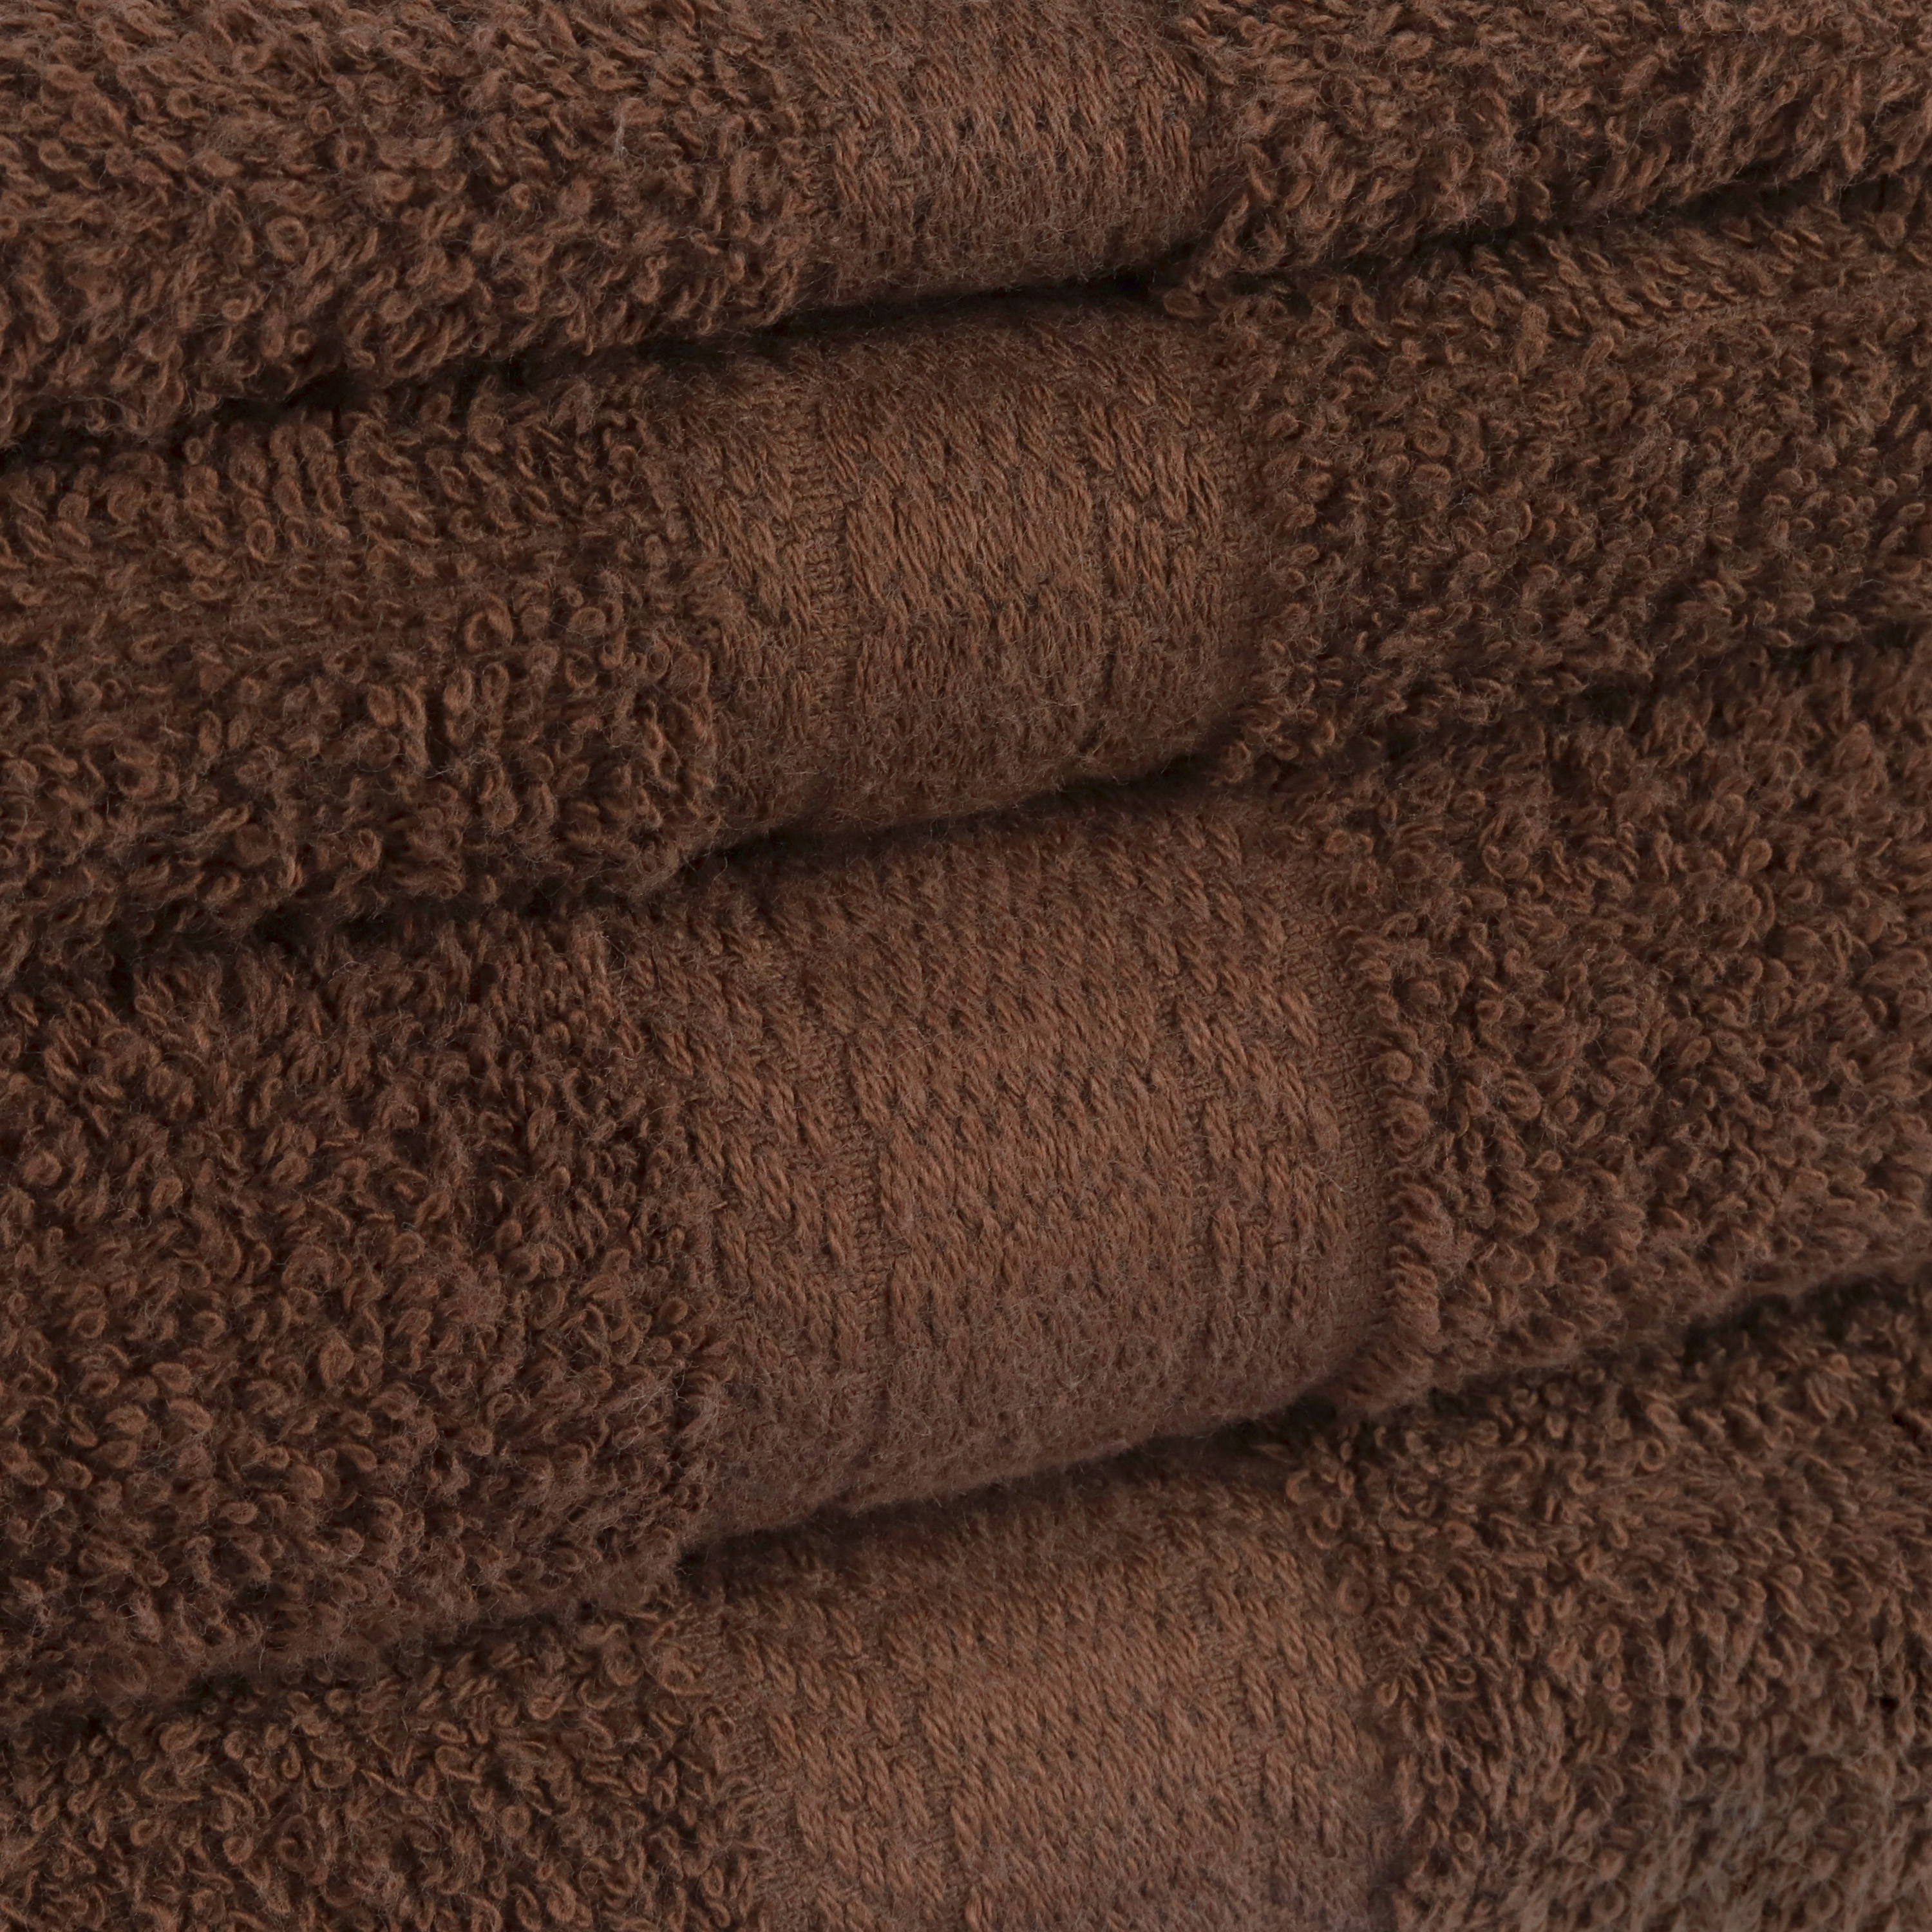 Mainstays Basic Solid 18-Piece Bath Towel Set Collection, Brown - image 2 of 10